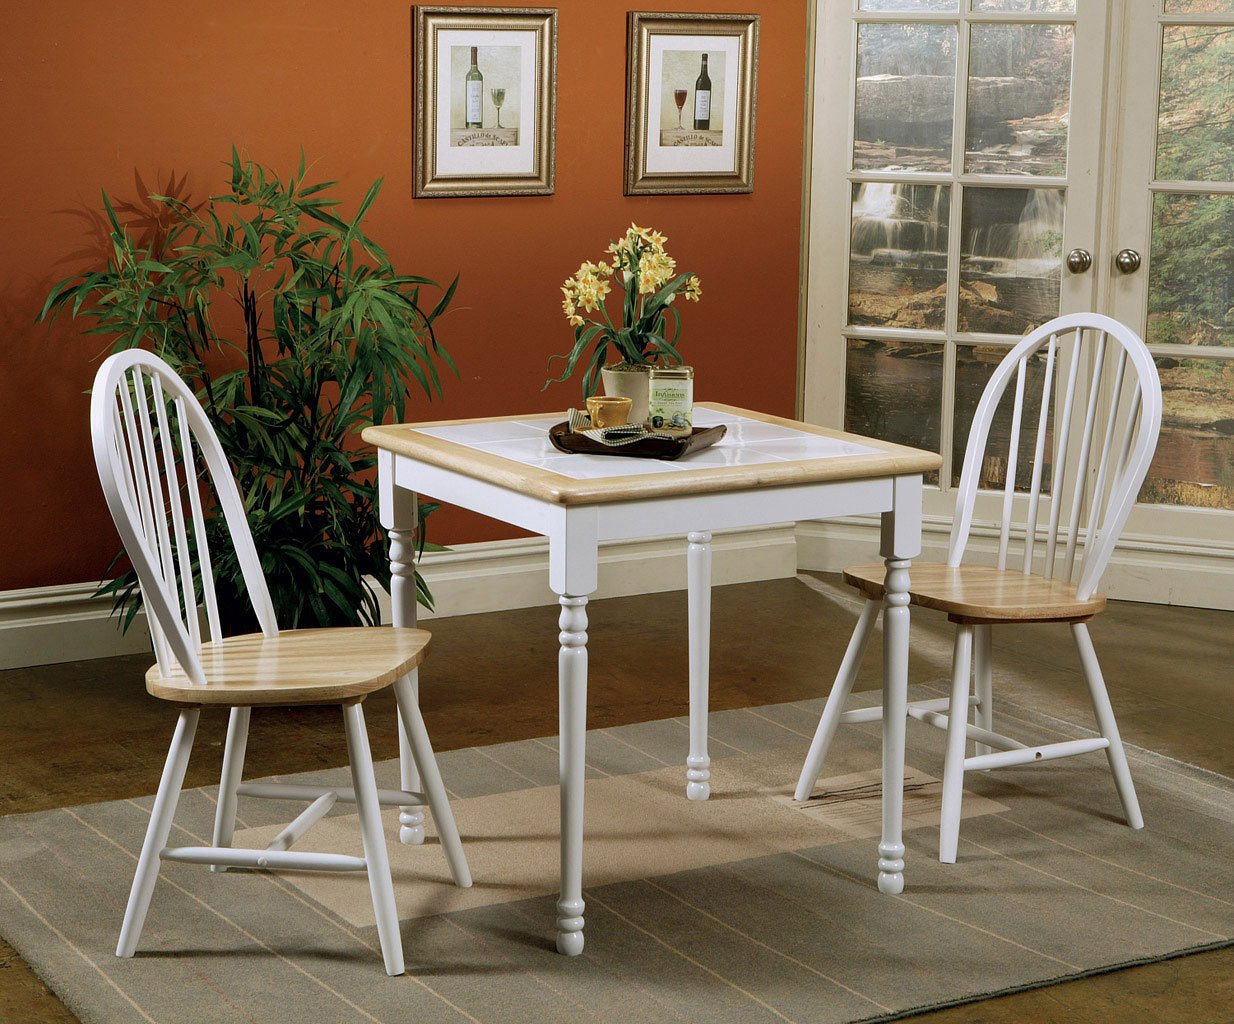 Damen 5 Piece Tile Top Dining Set in Natural and White by Coaster 4129-4191 